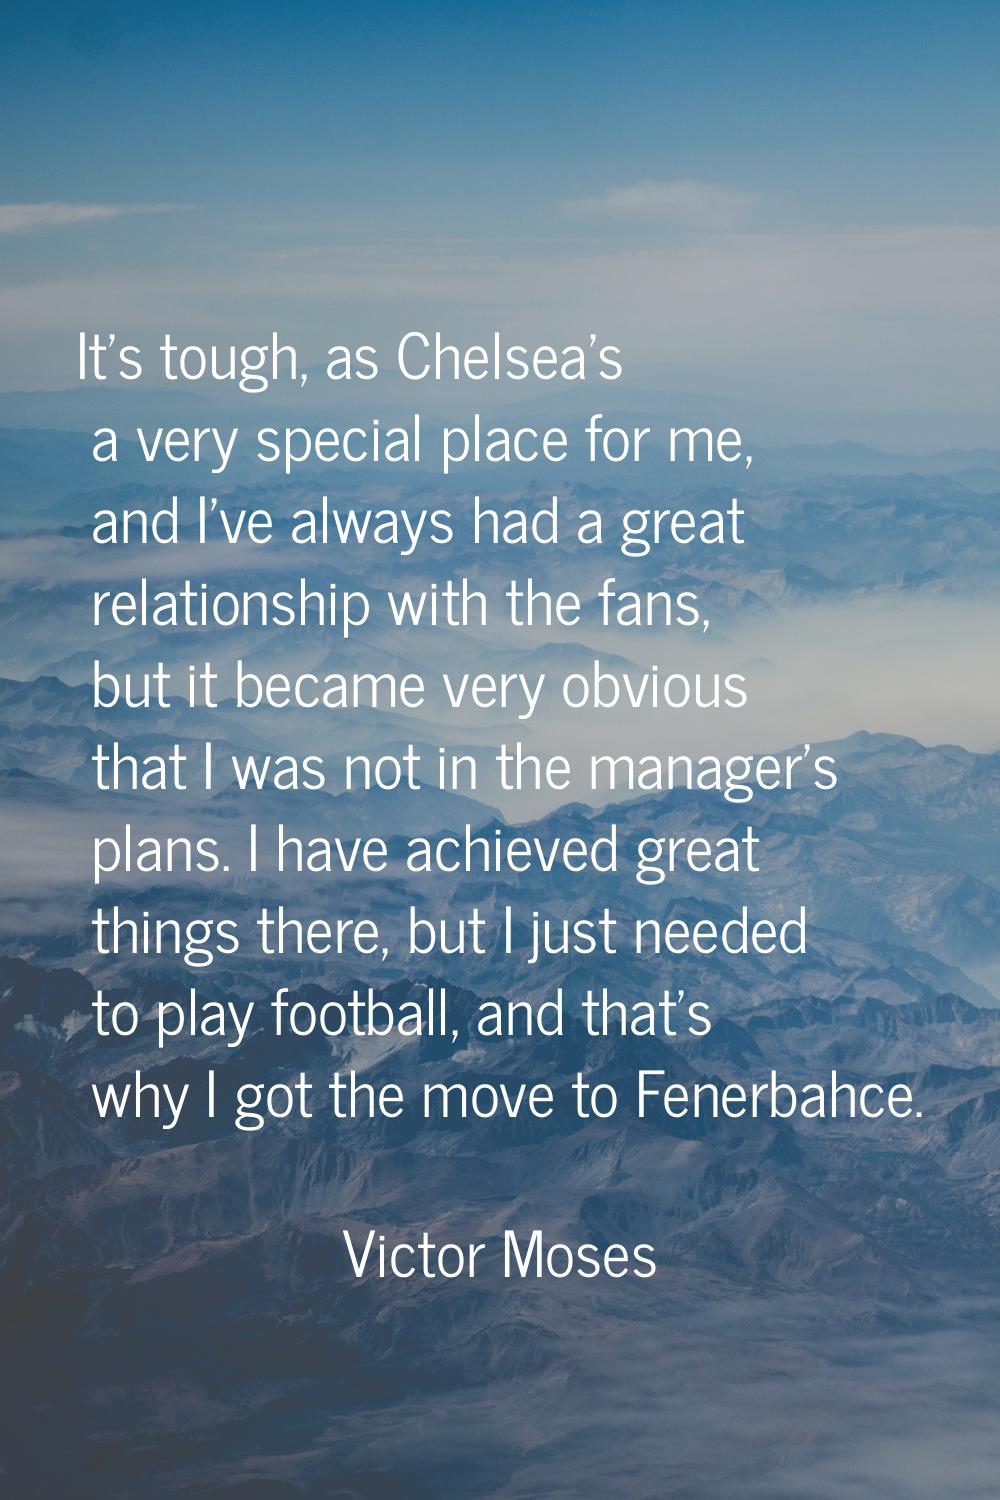 It's tough, as Chelsea's a very special place for me, and I've always had a great relationship with